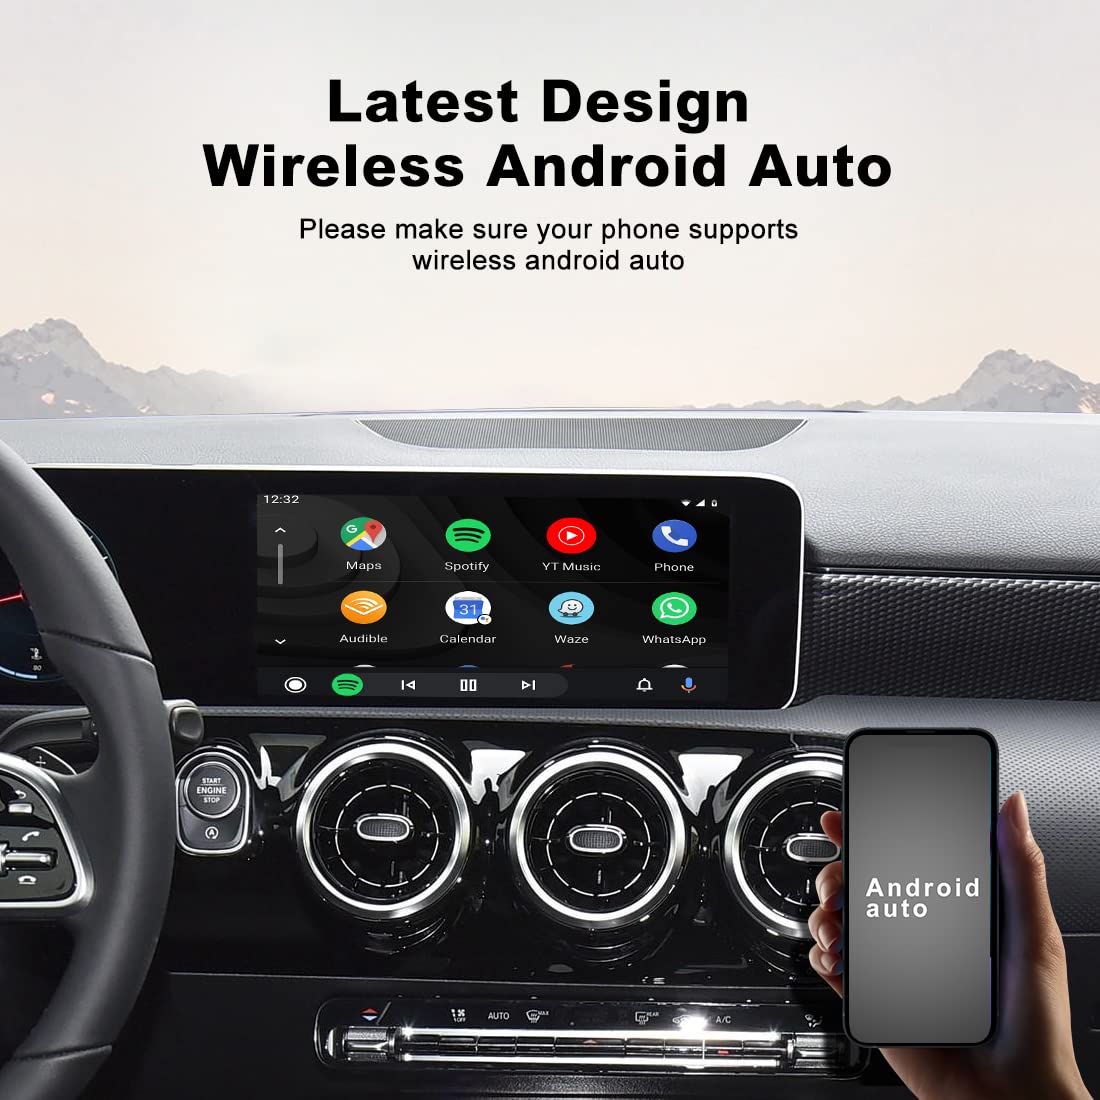 MMB Wireless CarPlay Adapter, Wireless Android Auto & Apple CarPlay 2 in 1 Adapte, Carplay USB Dongle for OEM Wired CarPlay Cars, Support Mirror Link/Phone Cast, Plug & Play